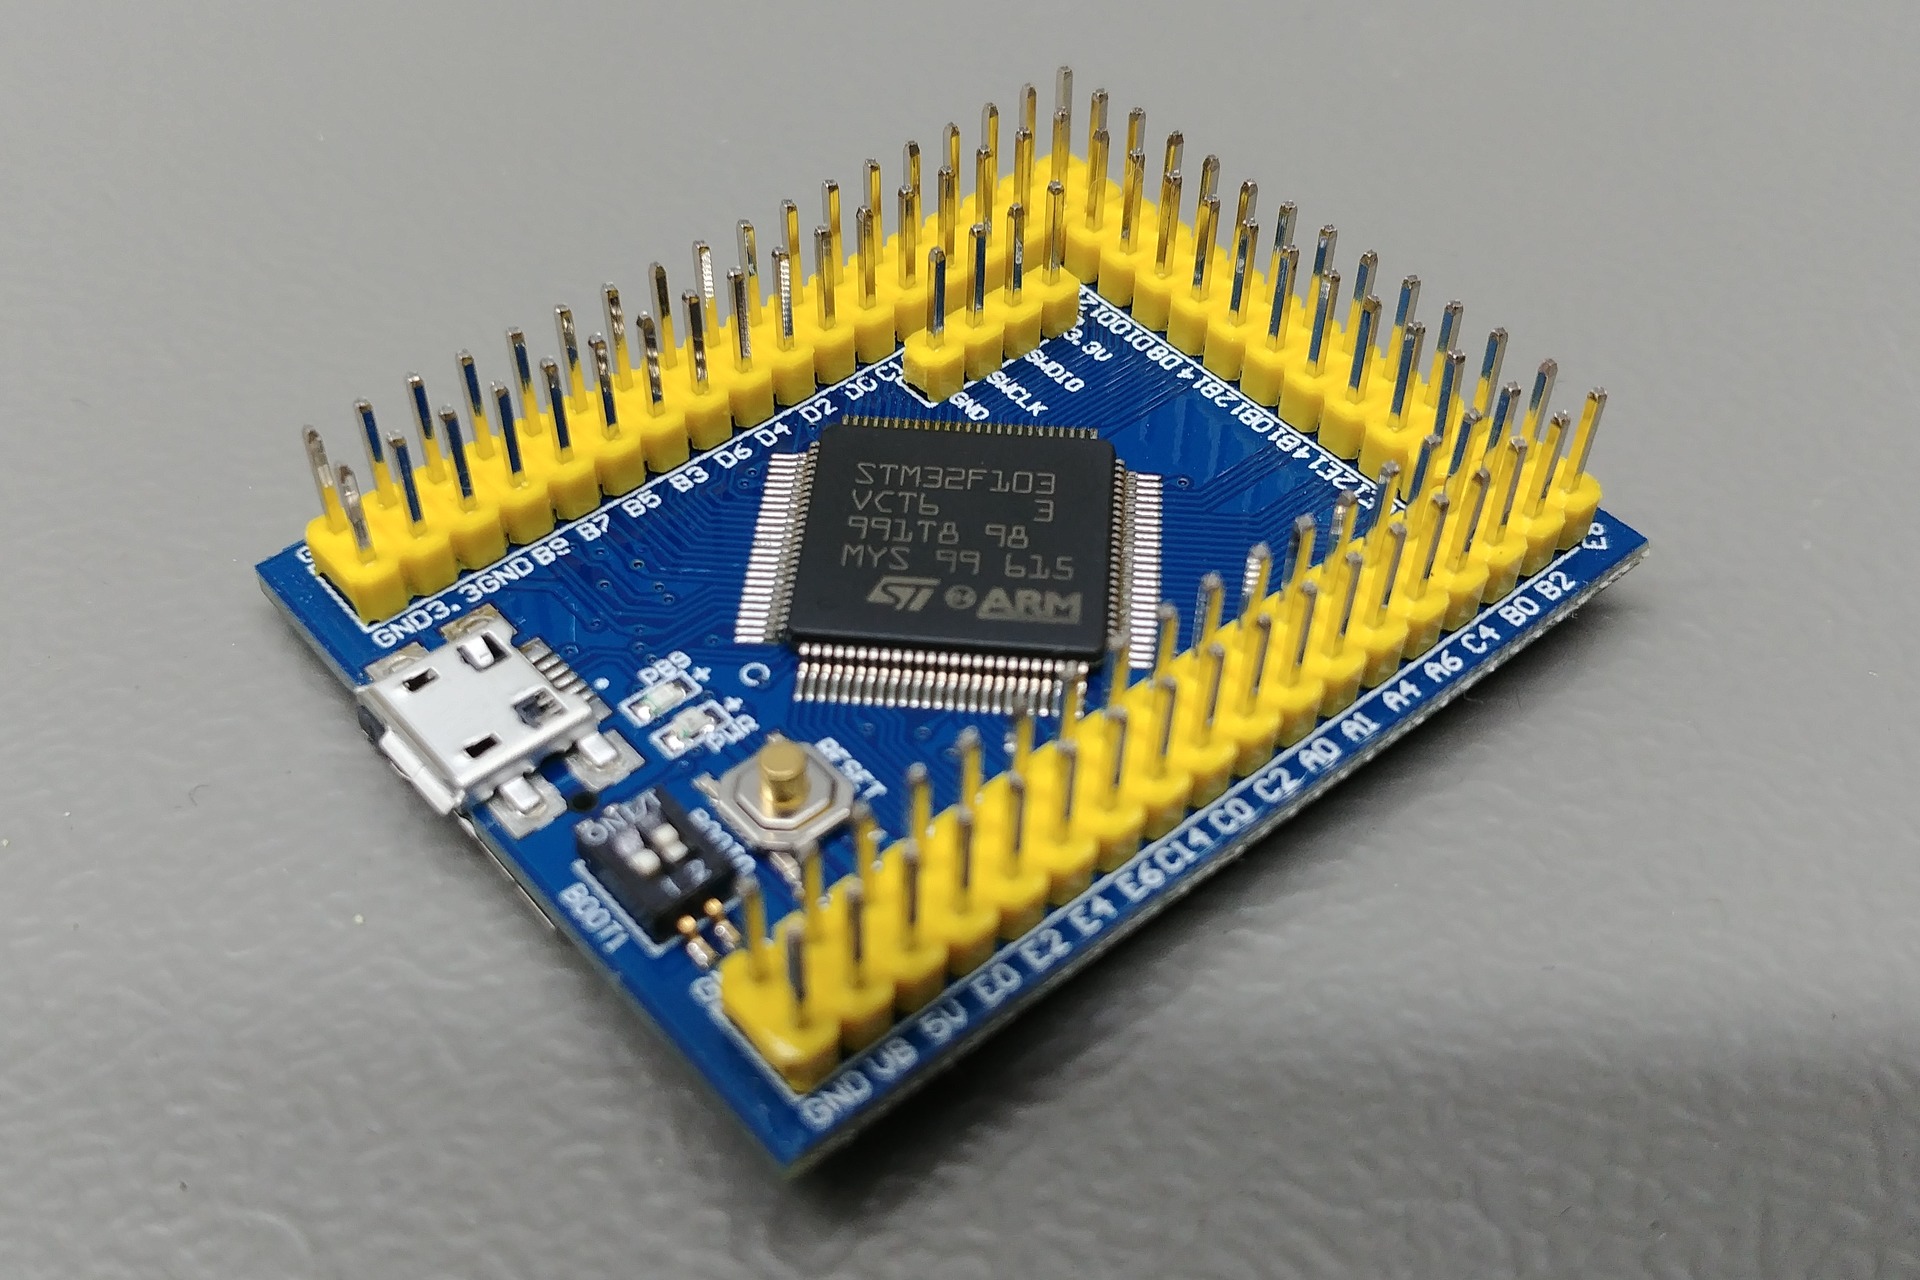 Picture of the vcc-gnd.com STM32F103VCT6 mini